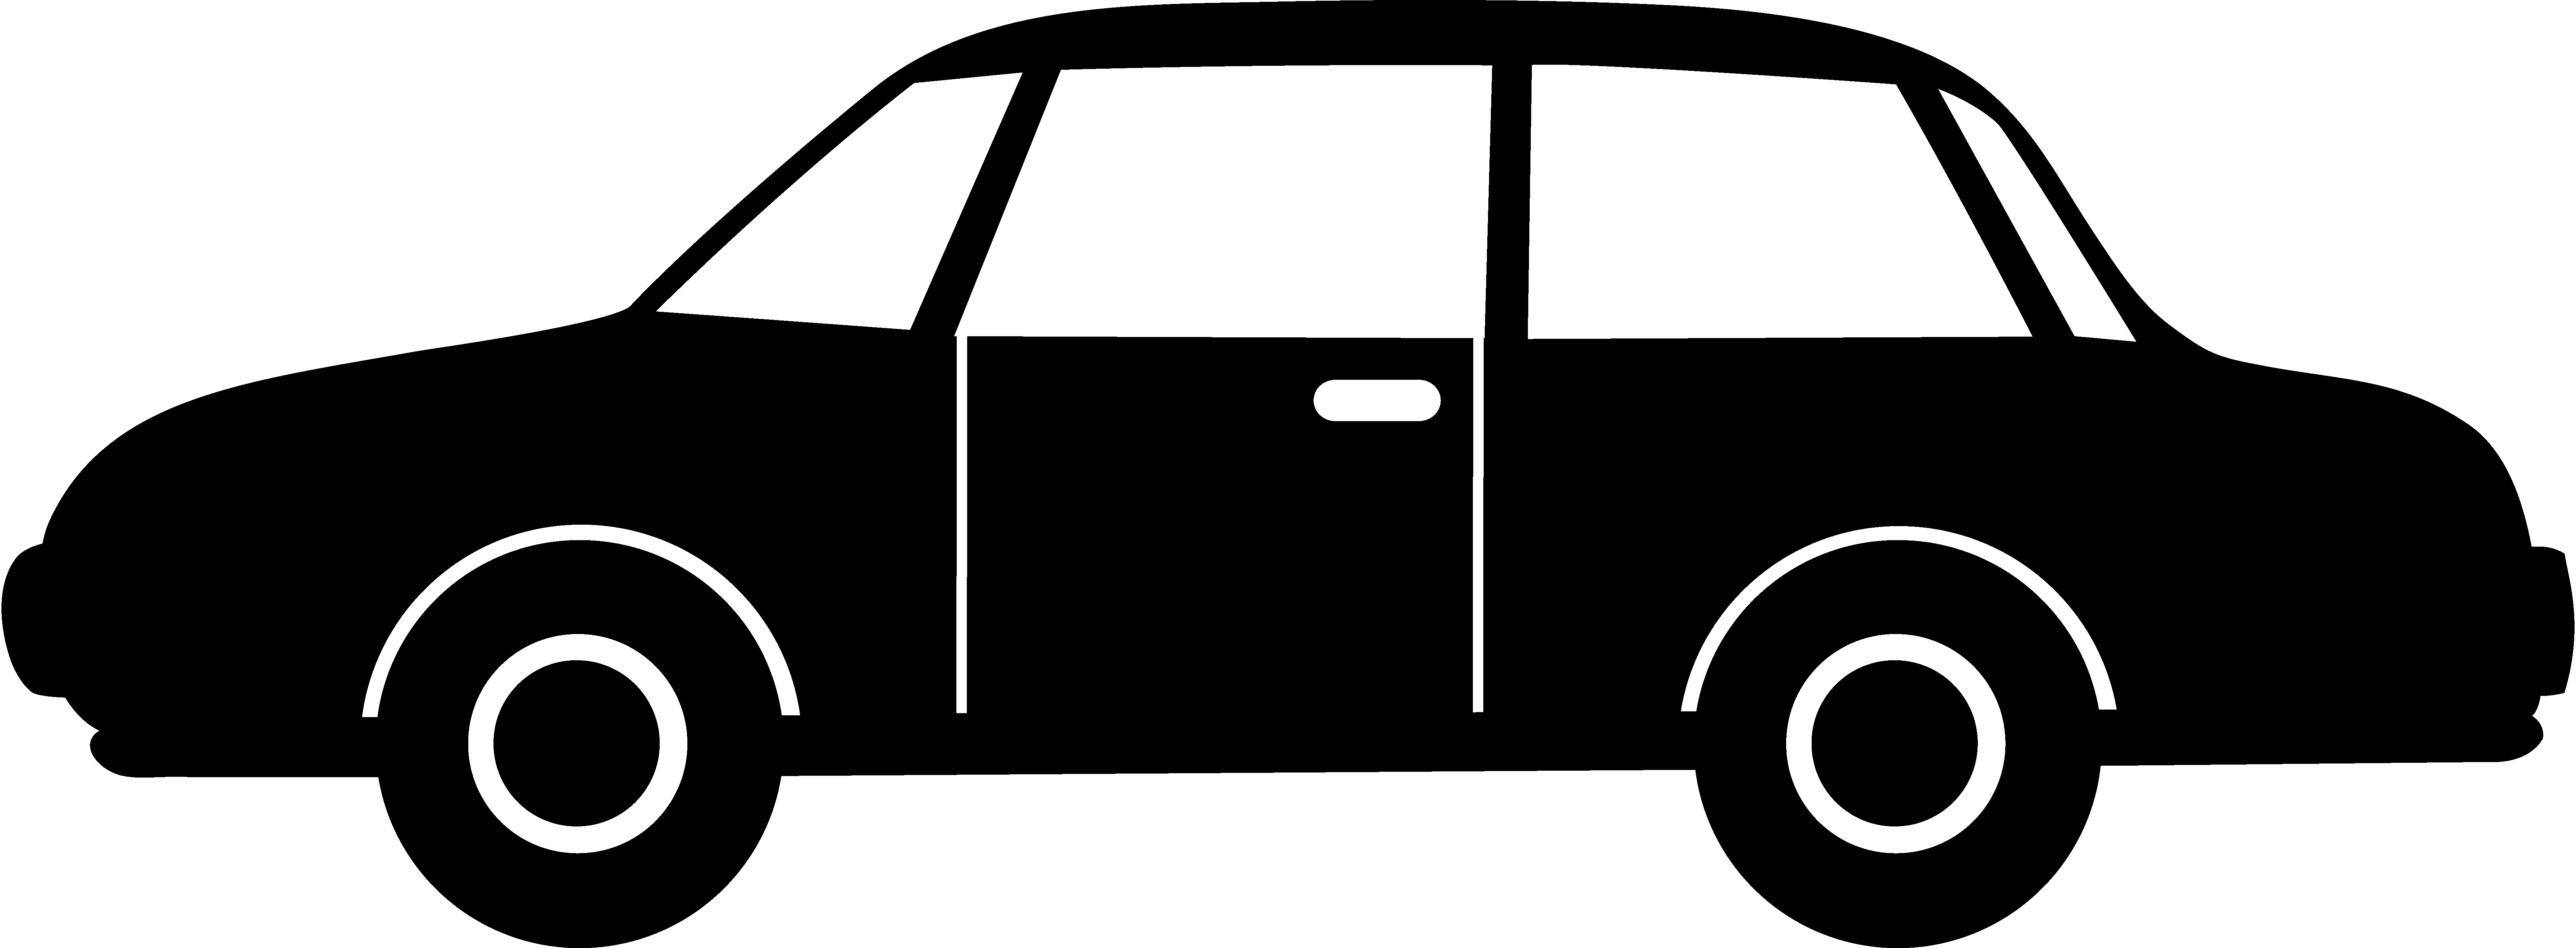 Sports Car Clipart Black And White | Clipart library - Free Clipart 